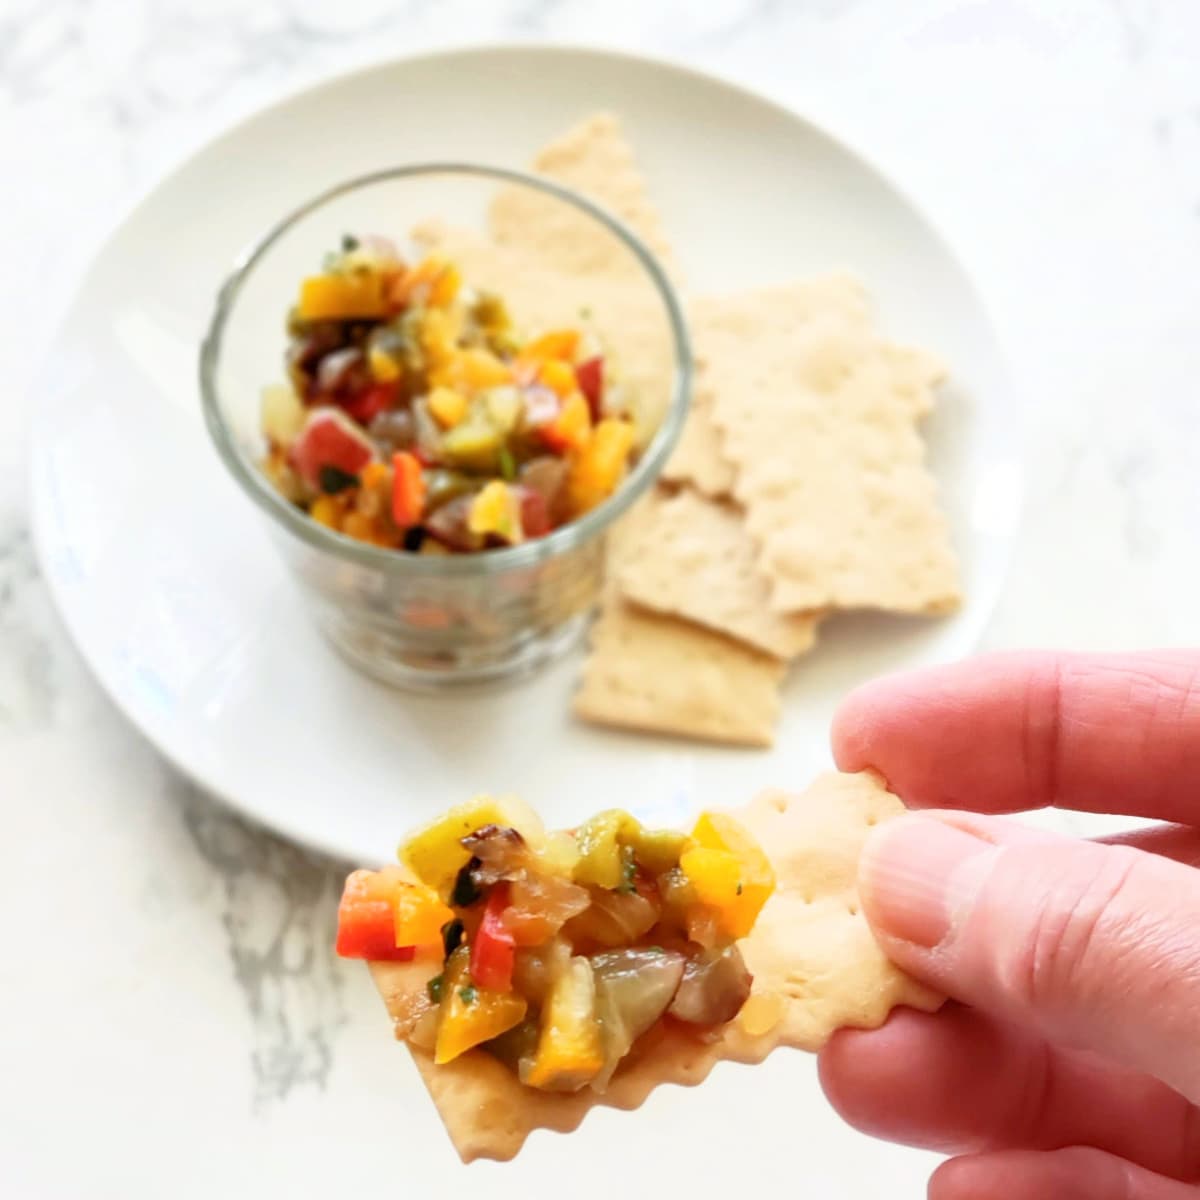 A hand holds a cracker with salsa while more salsa and crackers are in the background